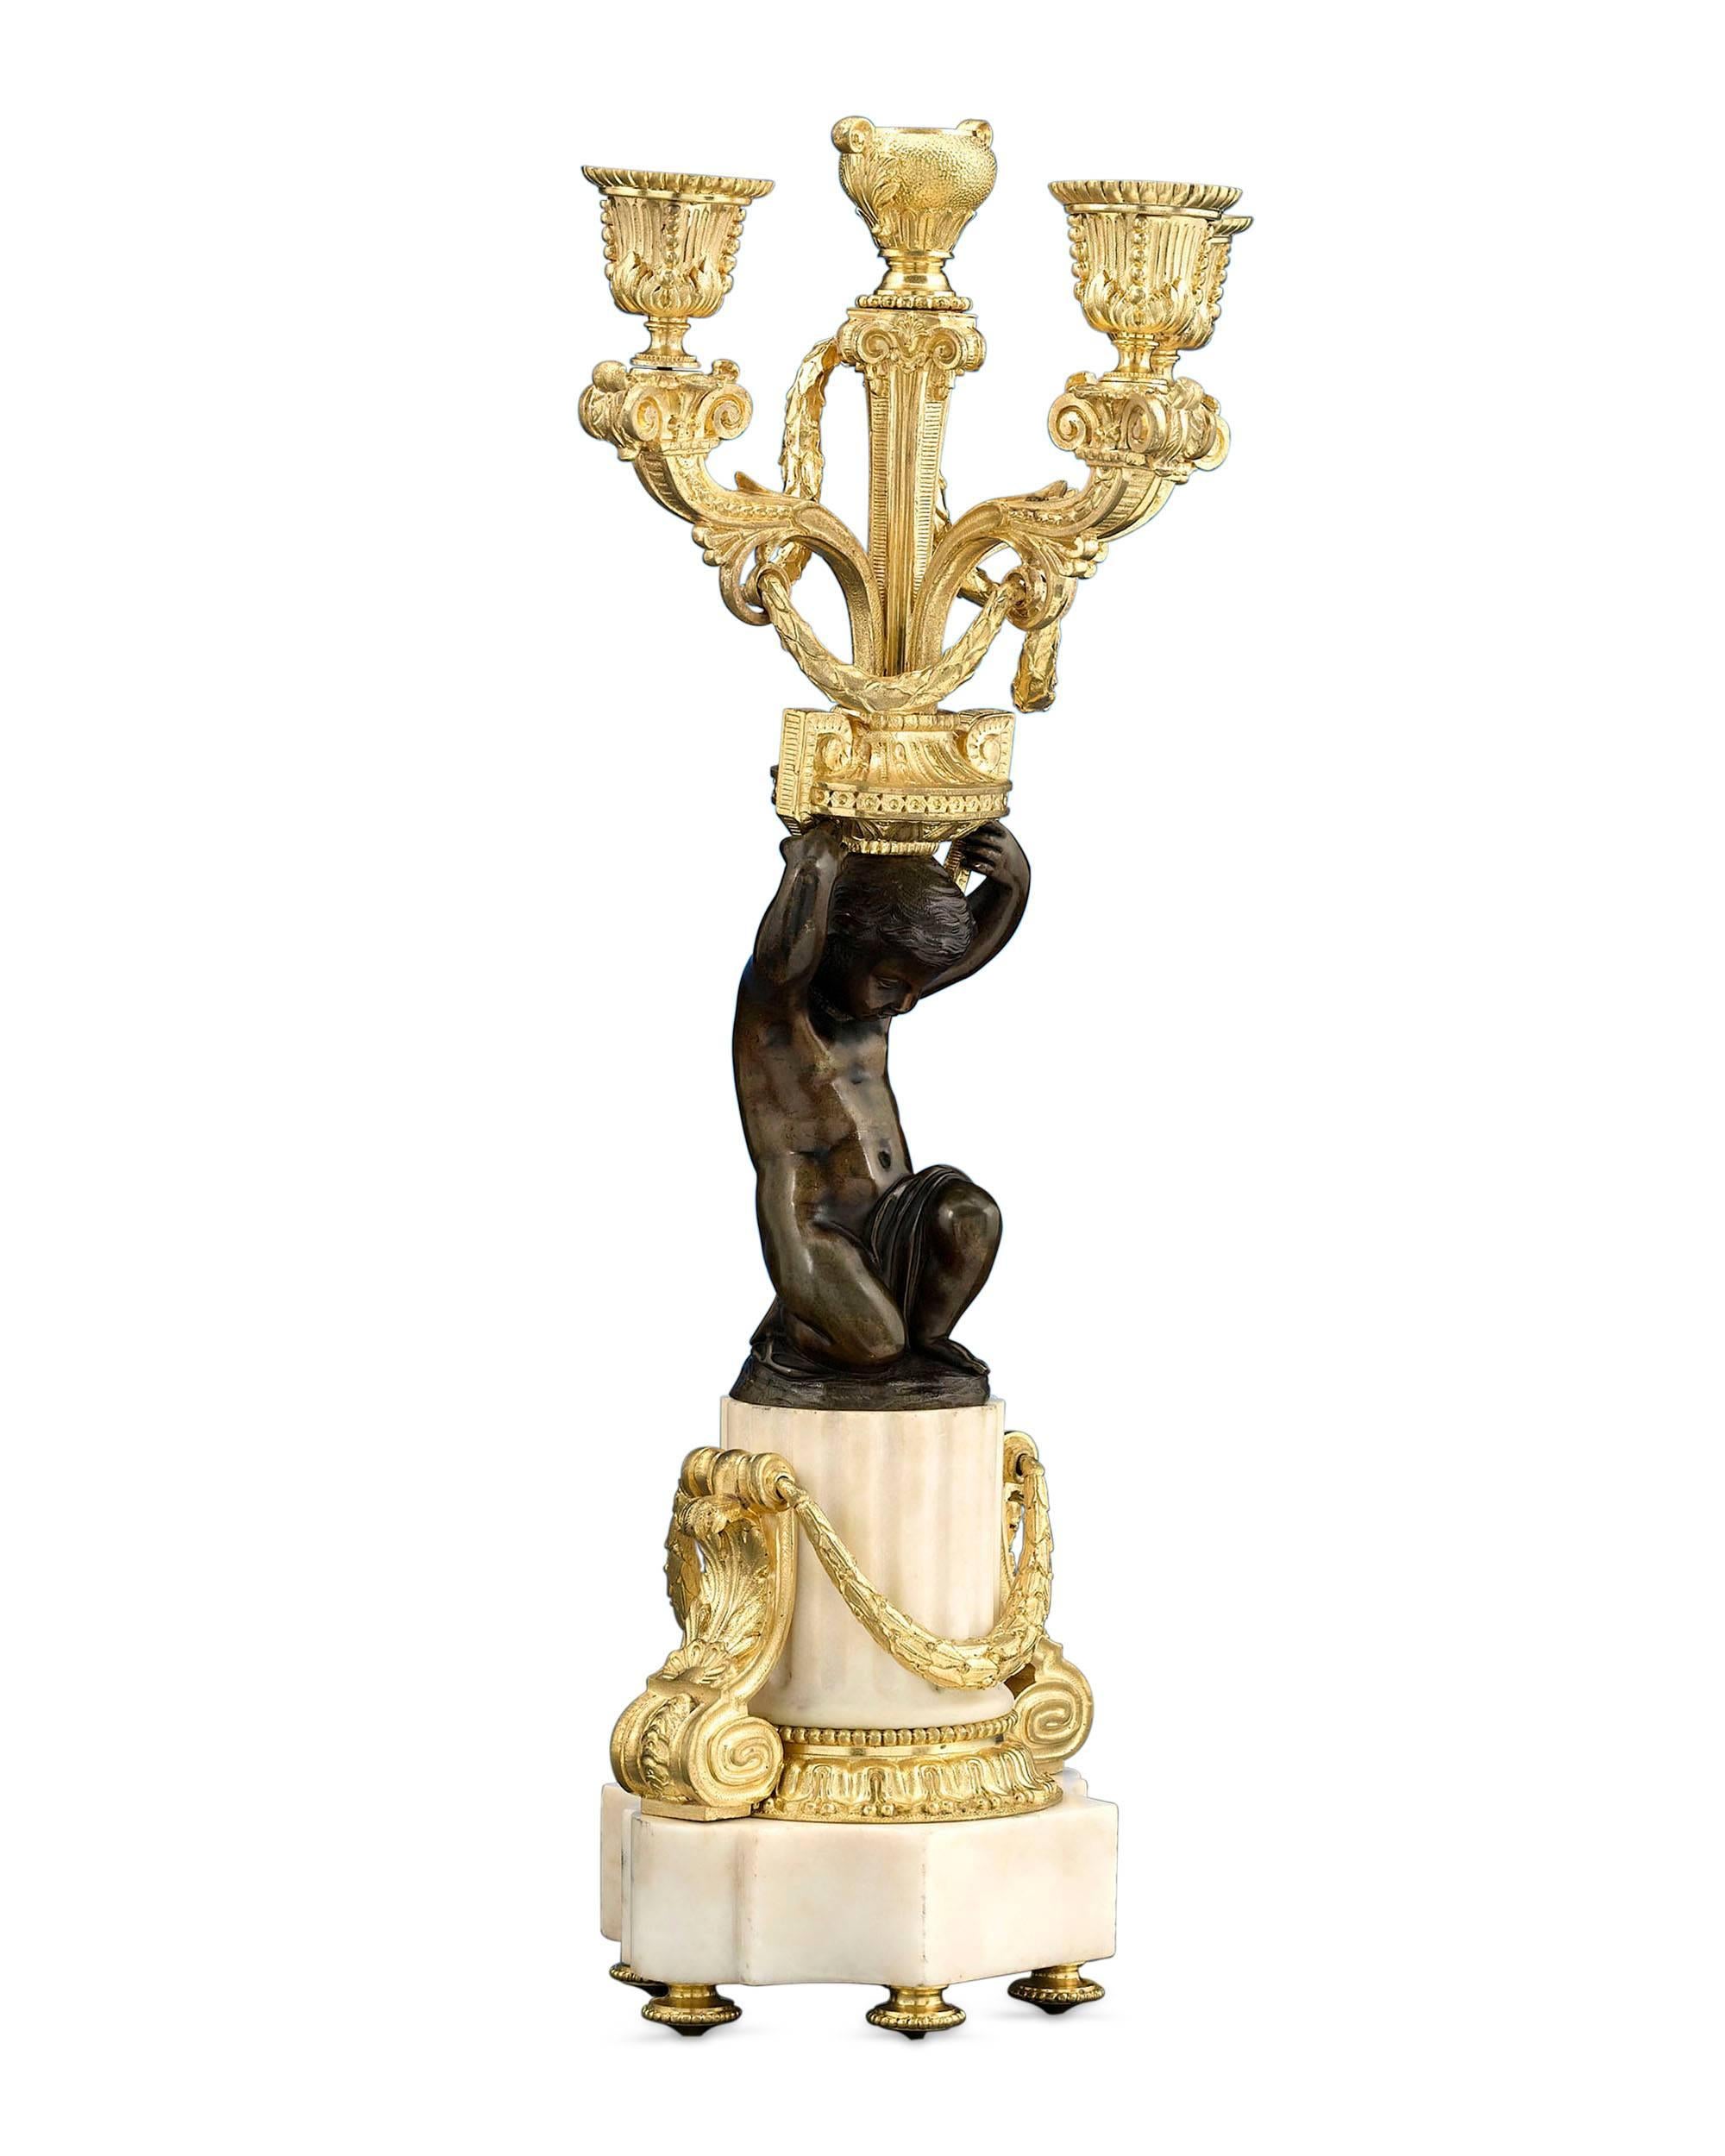 This exceptional pair of French Louis XVI-style marble and bronze candelabra exhibit the timeless neoclassical style of the late 18th century. The classical boldness and elegance of this aesthetic period is clearly evident in these monumental